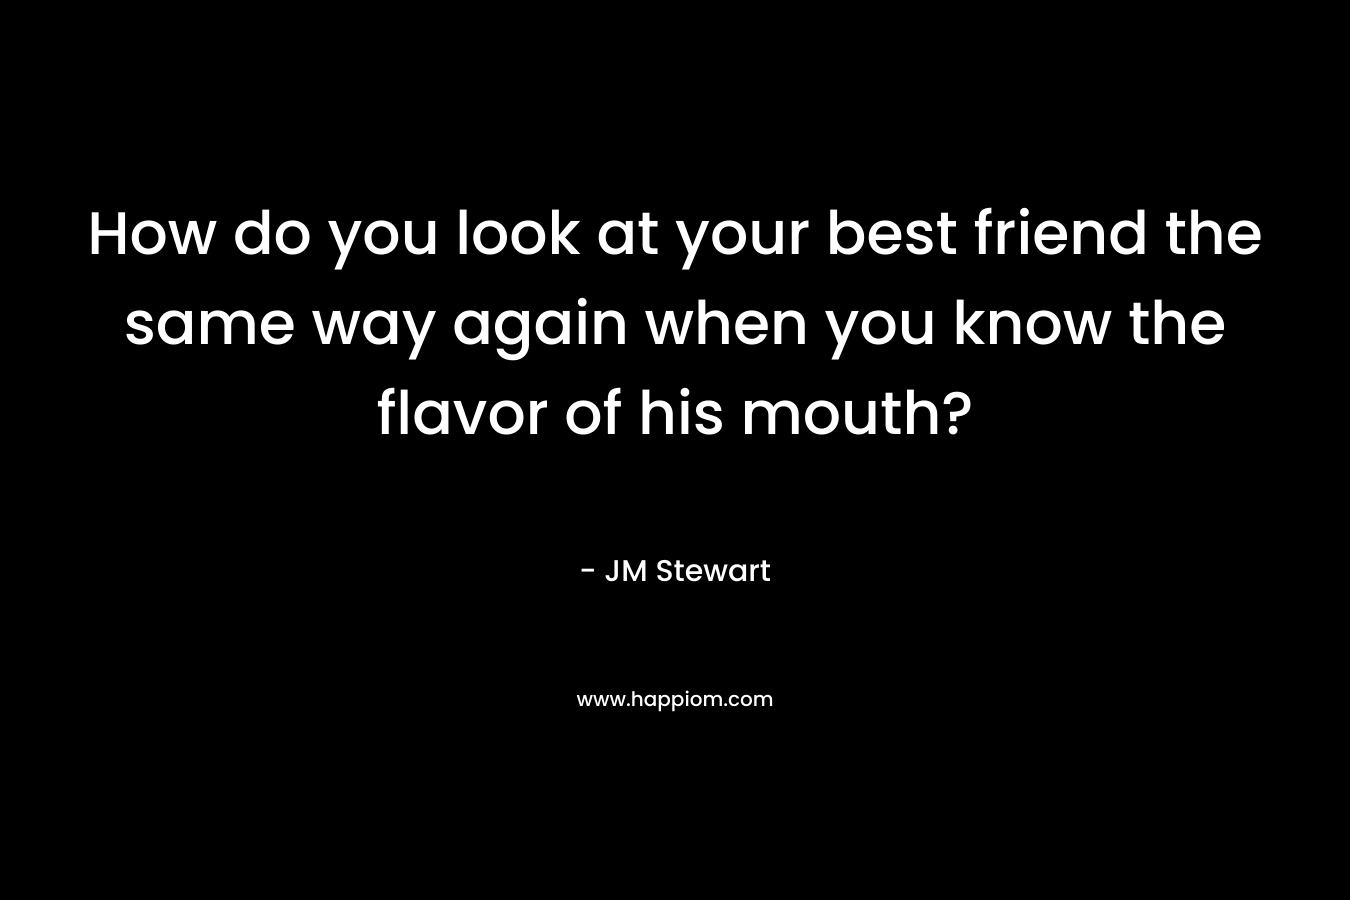 How do you look at your best friend the same way again when you know the flavor of his mouth?